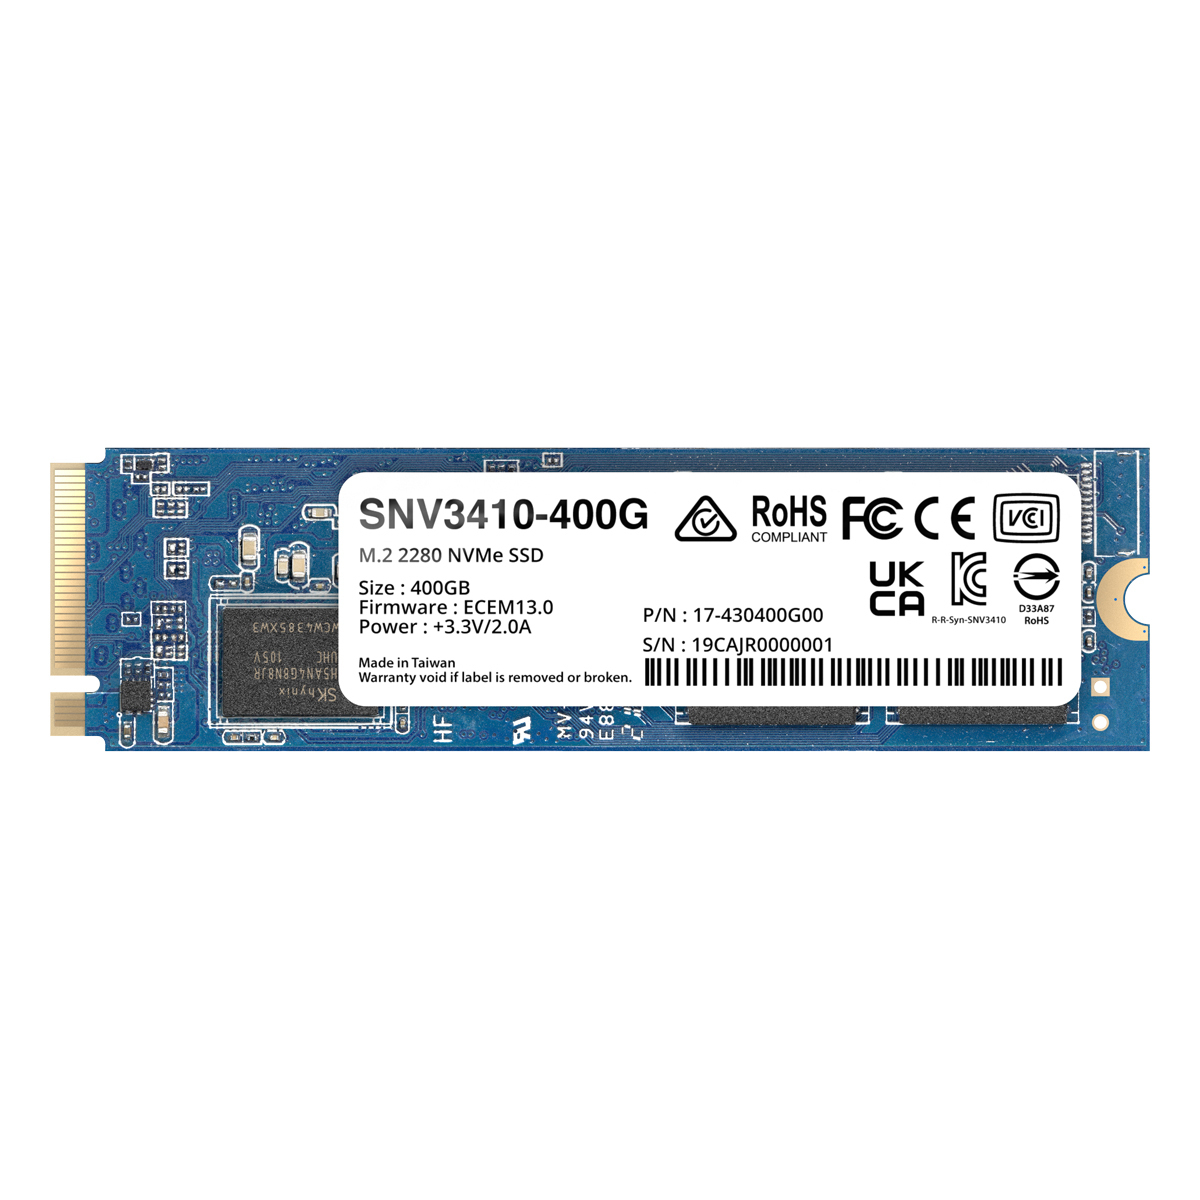 Synology SNV3410 SSD 400GB M.2 2280 PCIe 3.0 x4 NVMe - internes Solid-State-Module (SNV3410-400G) von Synology